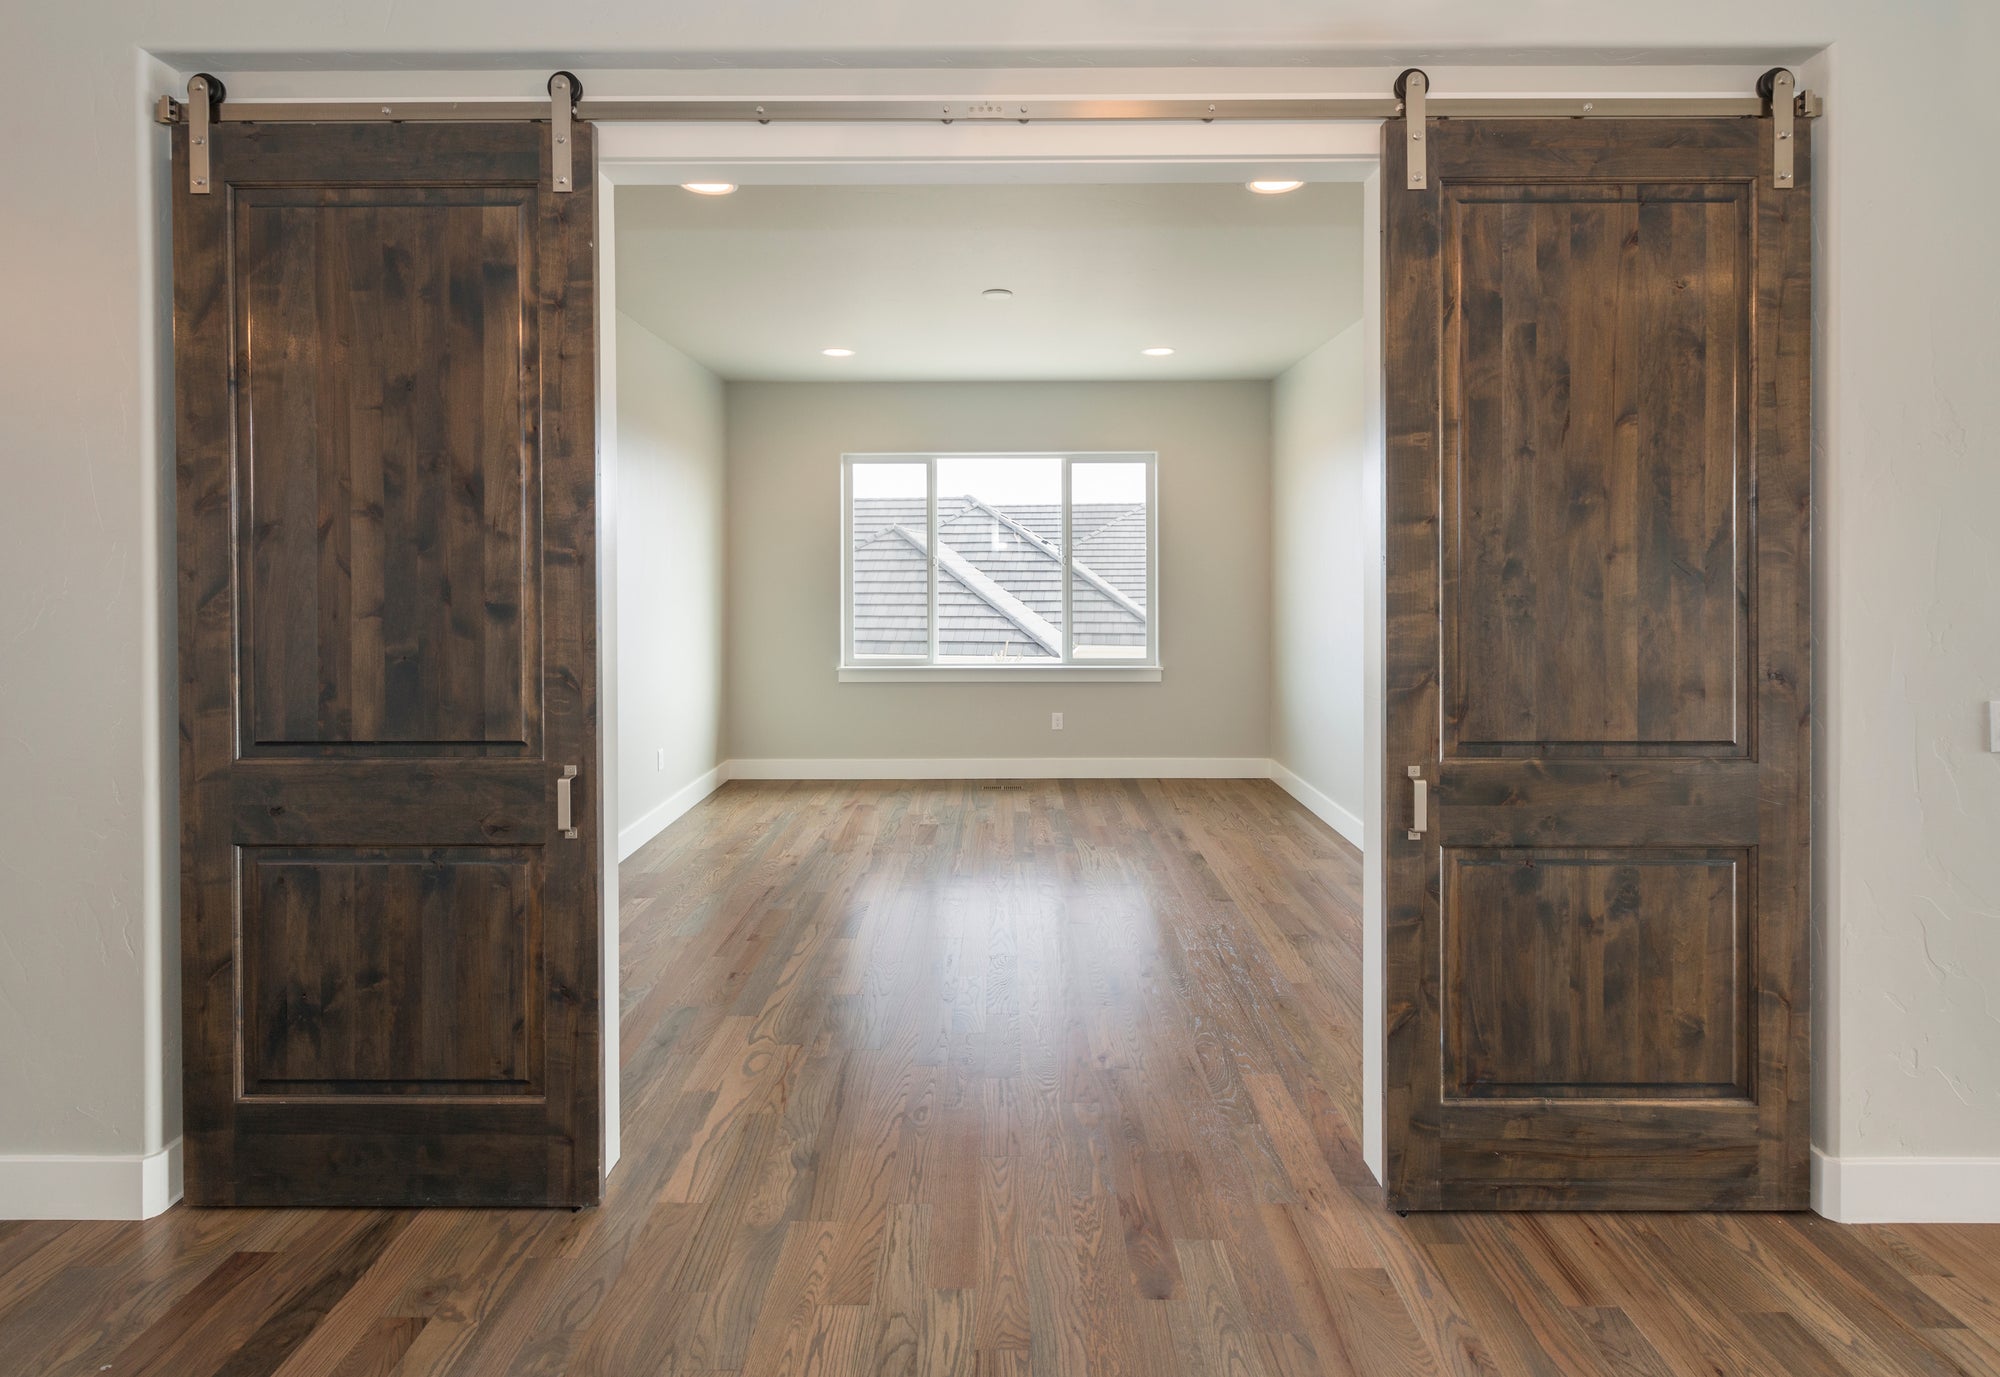 5 Ways to Incorporate a Custom Barn Door Into Your Space